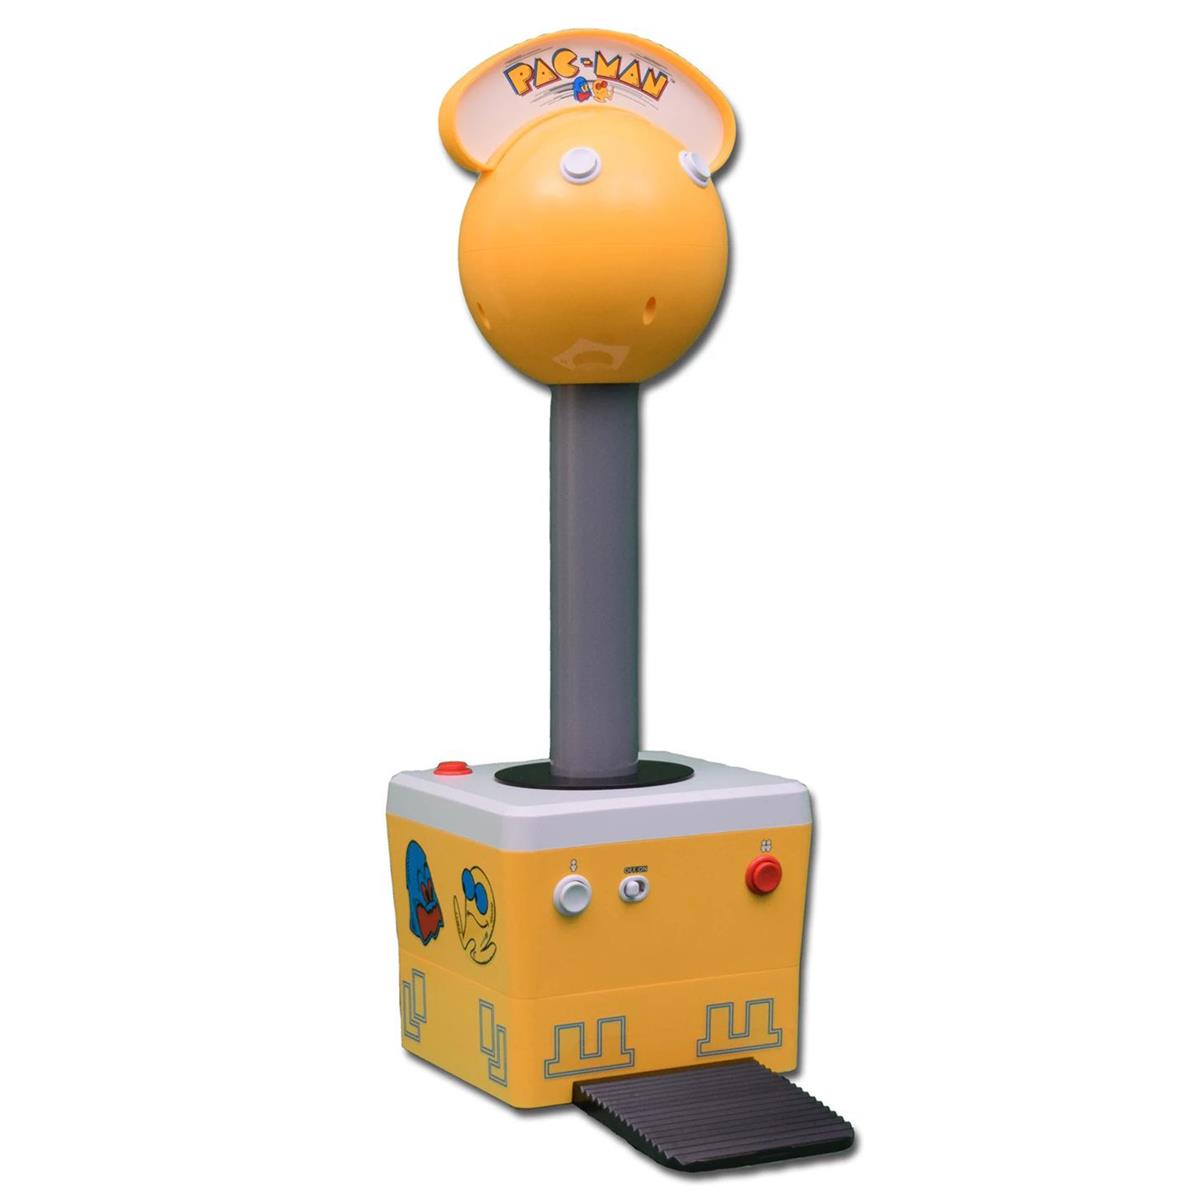 Arcade1up   PAC-MAN™ Giant Joystick Plug and Play $49 free shipping $49.99